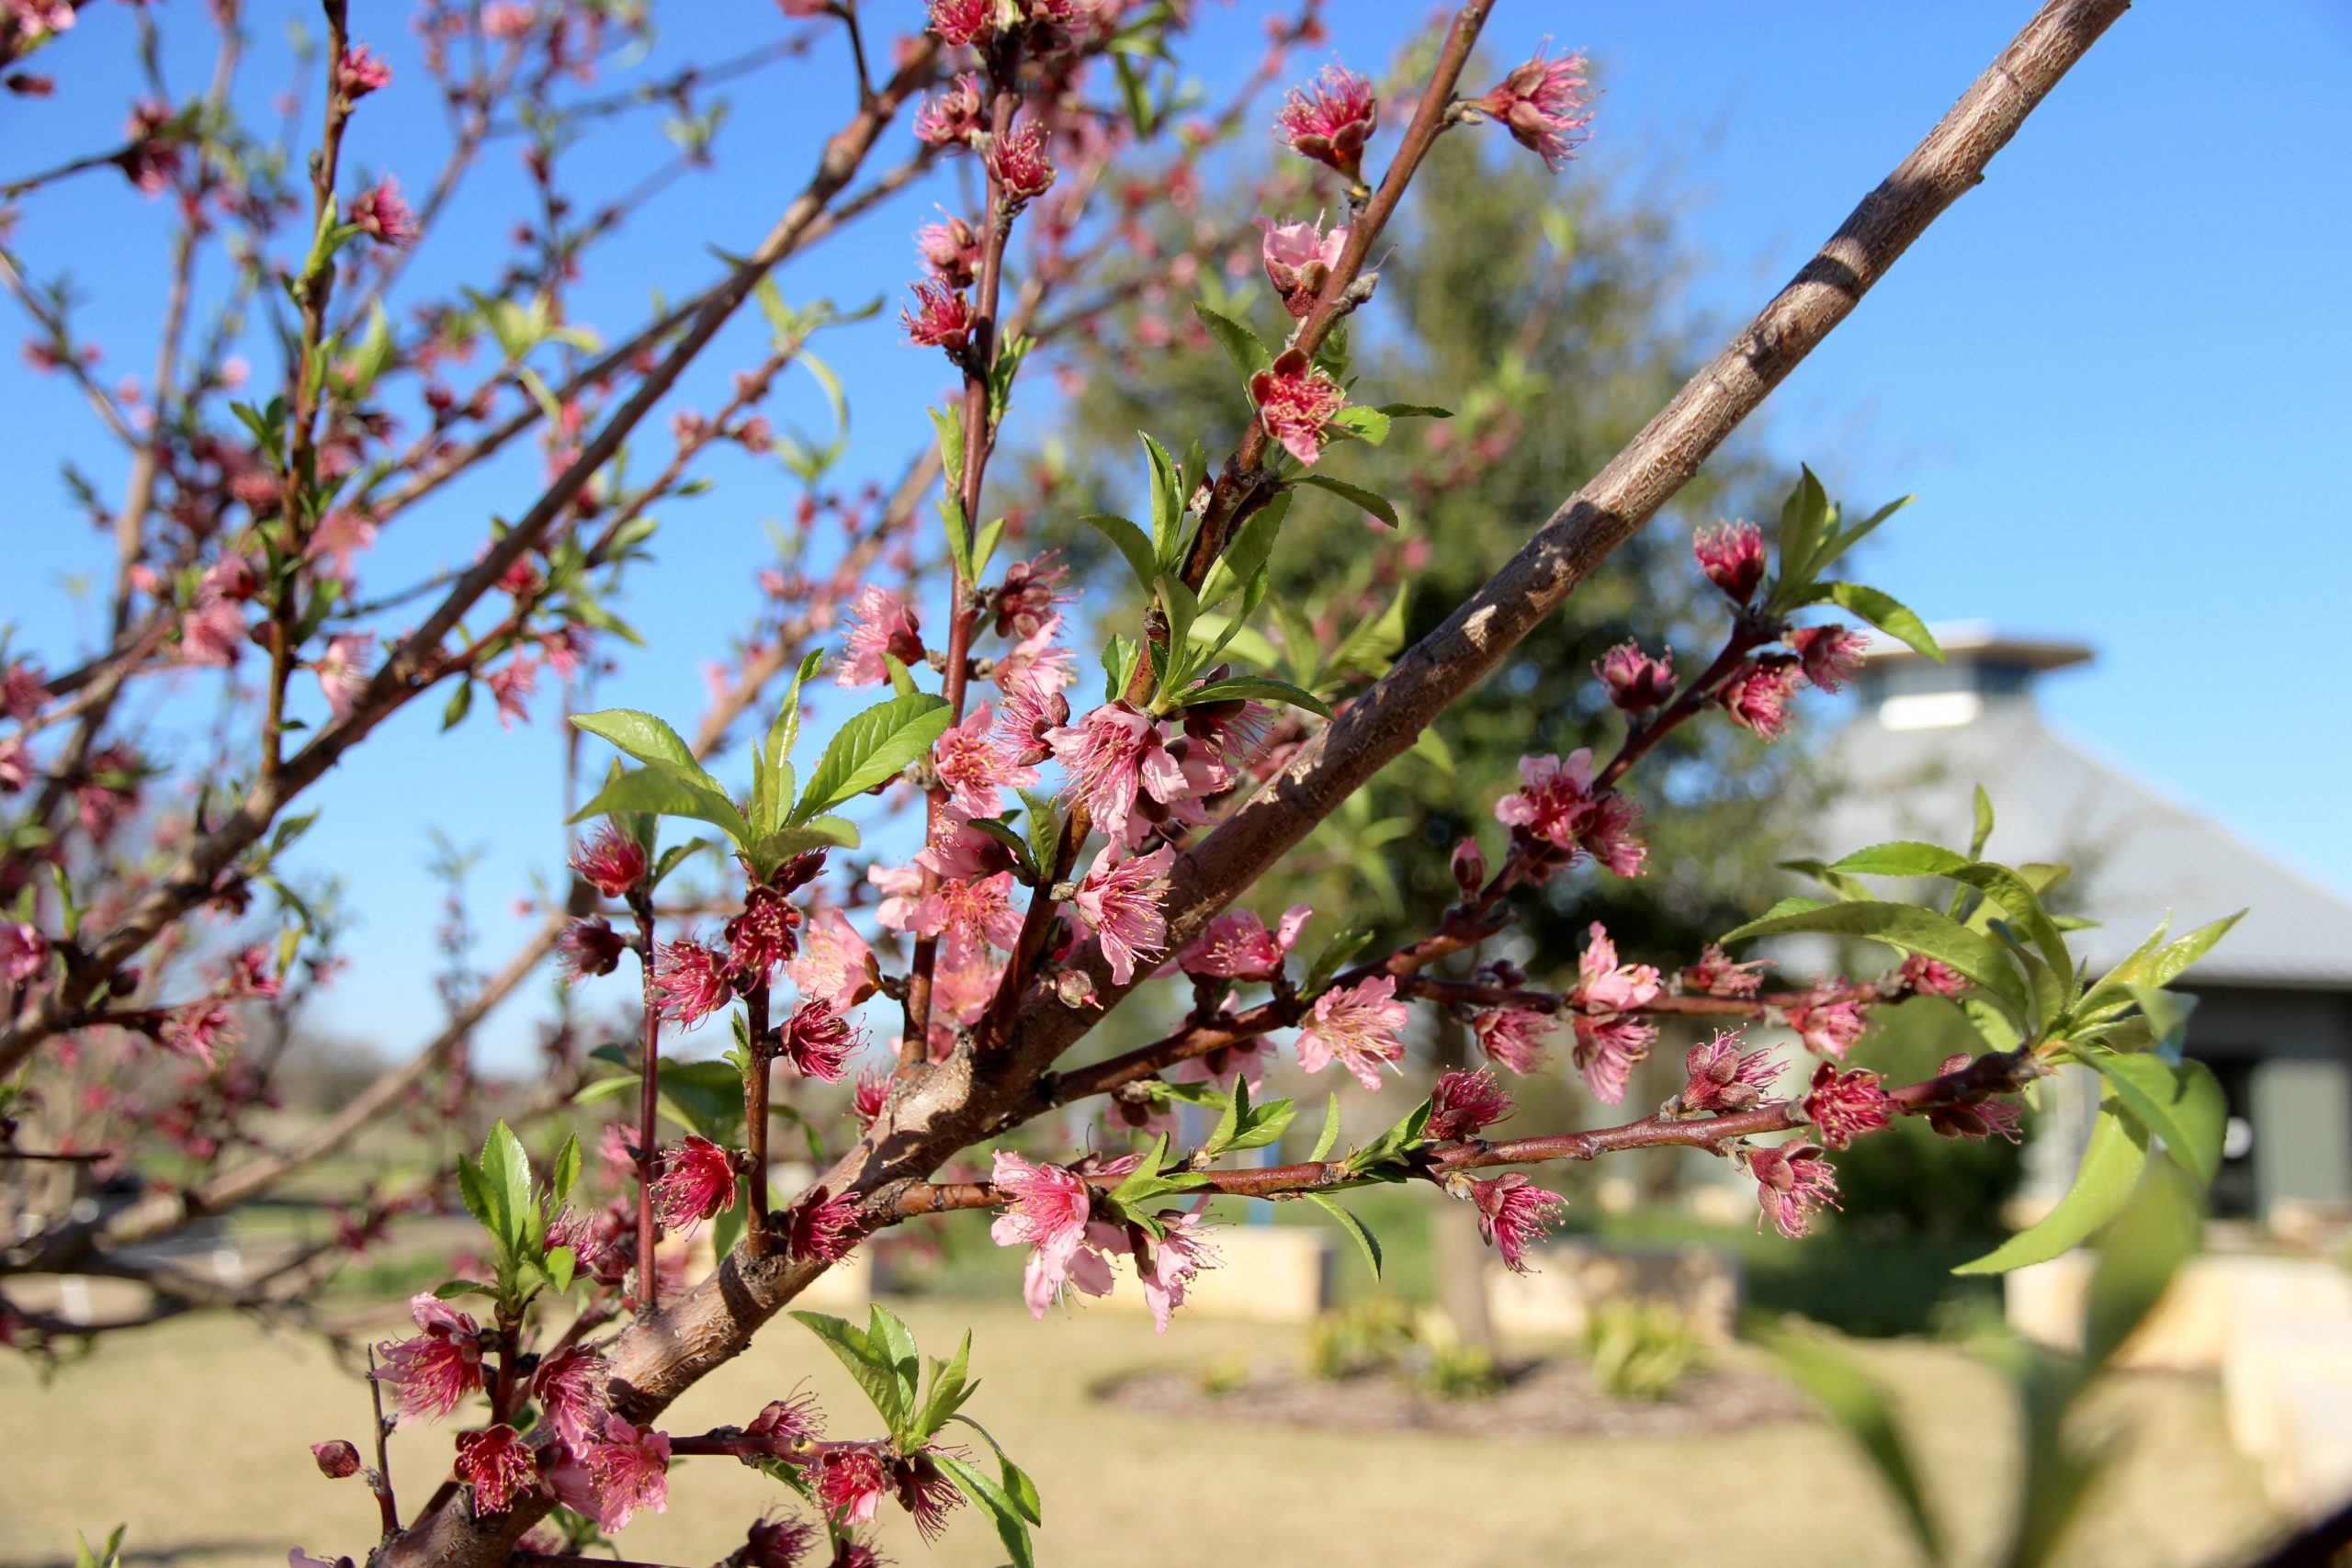 Peach tree blooms in bright pink.